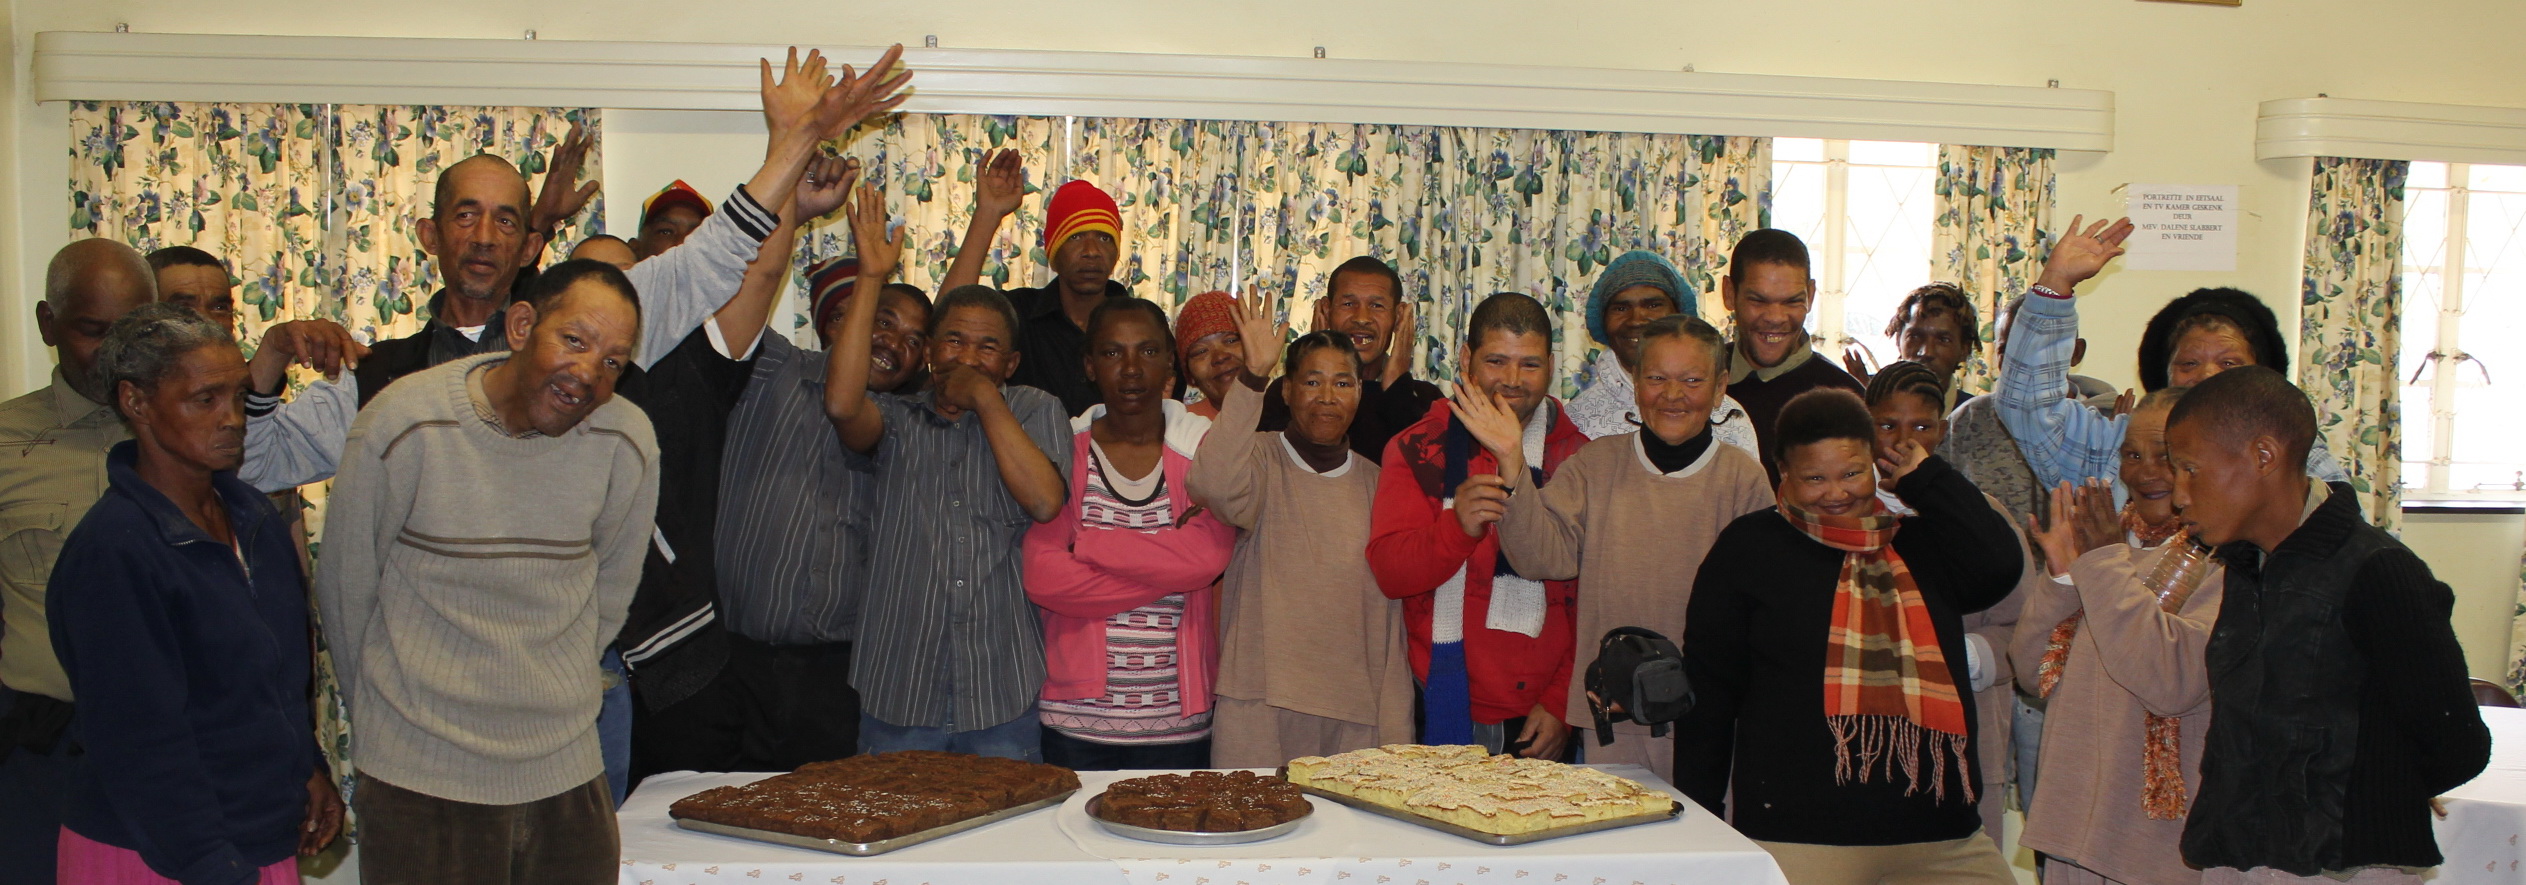 A group of mental health patients enjoyed some cake as part of the celebrations.